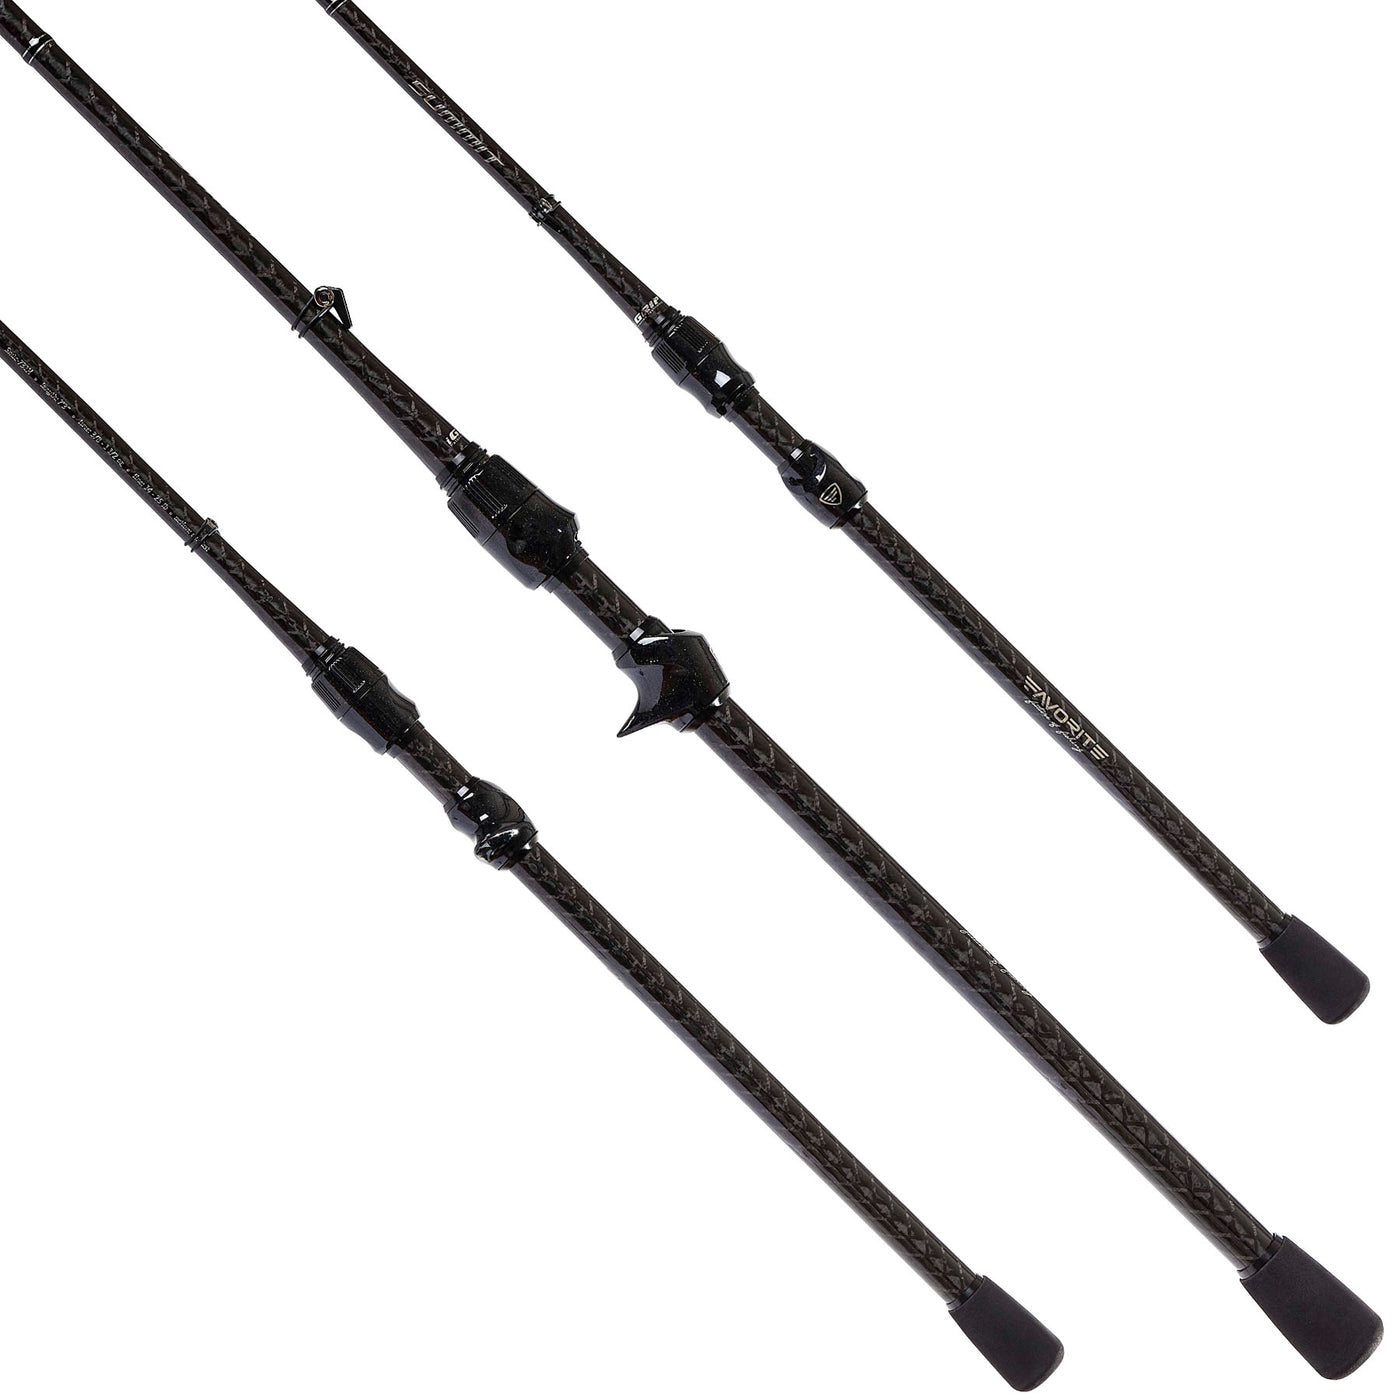 Top 14 discount casting rods in 2019